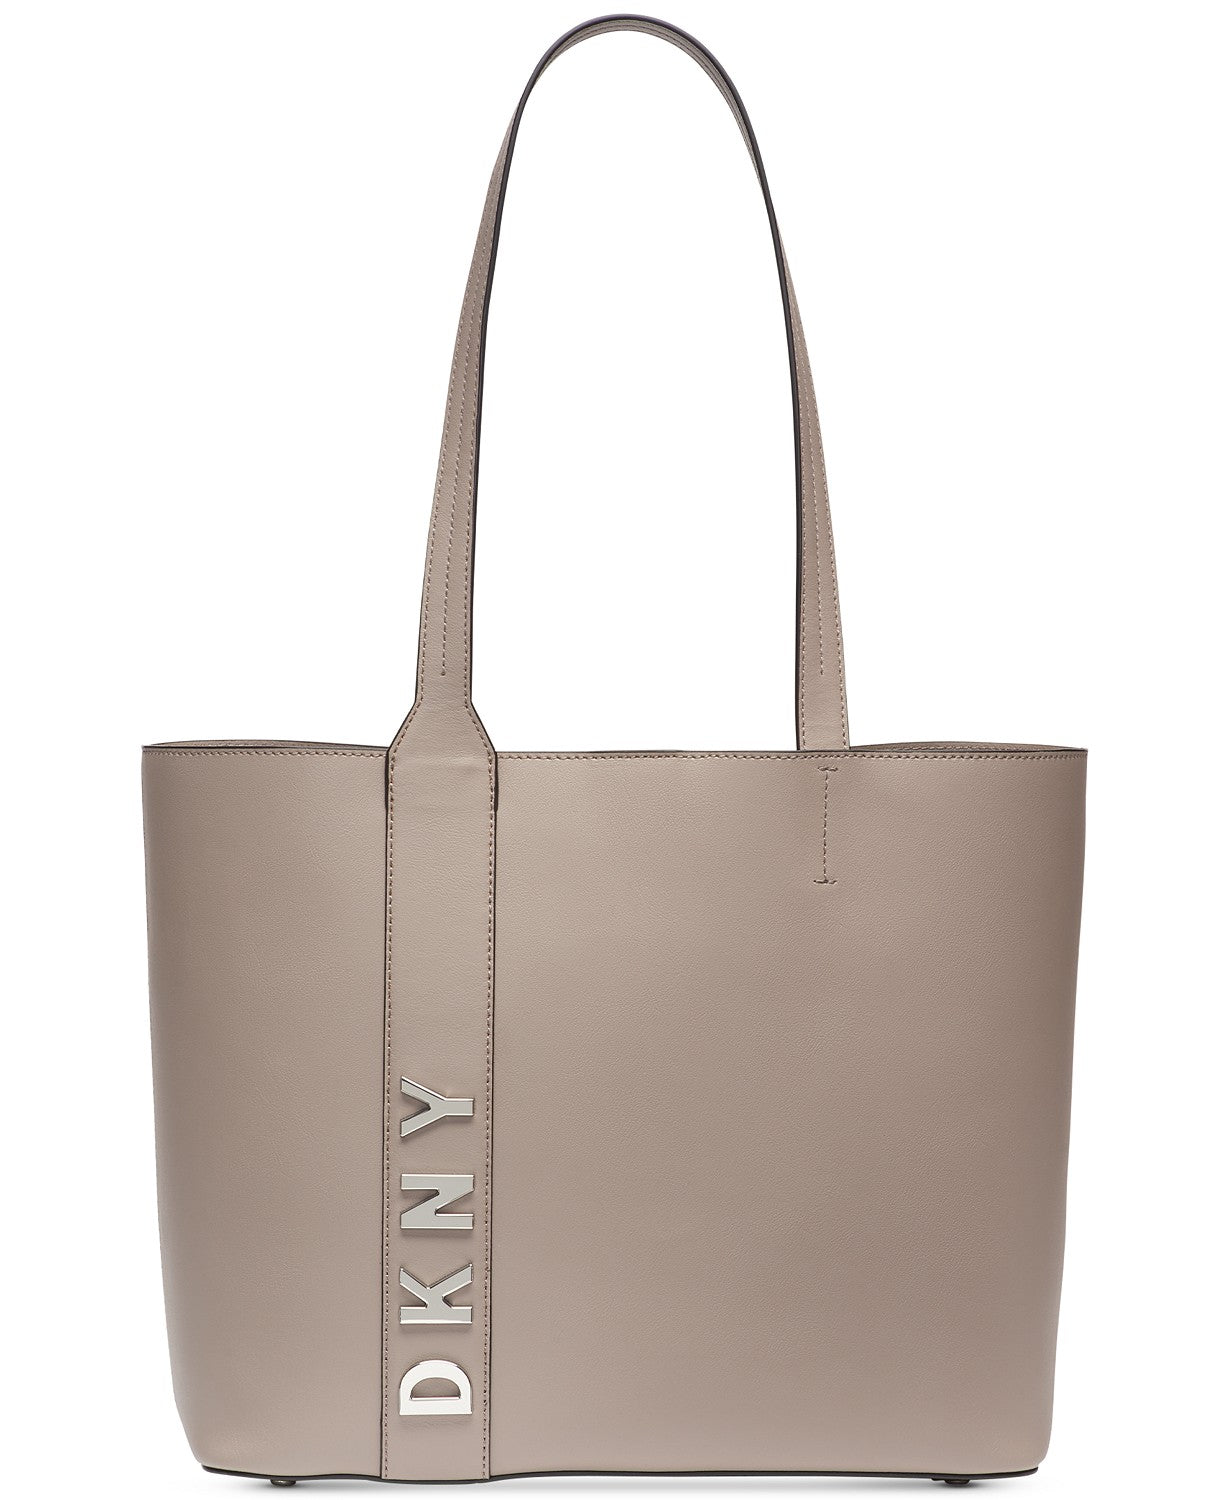 DKNY Bedford Mastrotto Leather Tote 